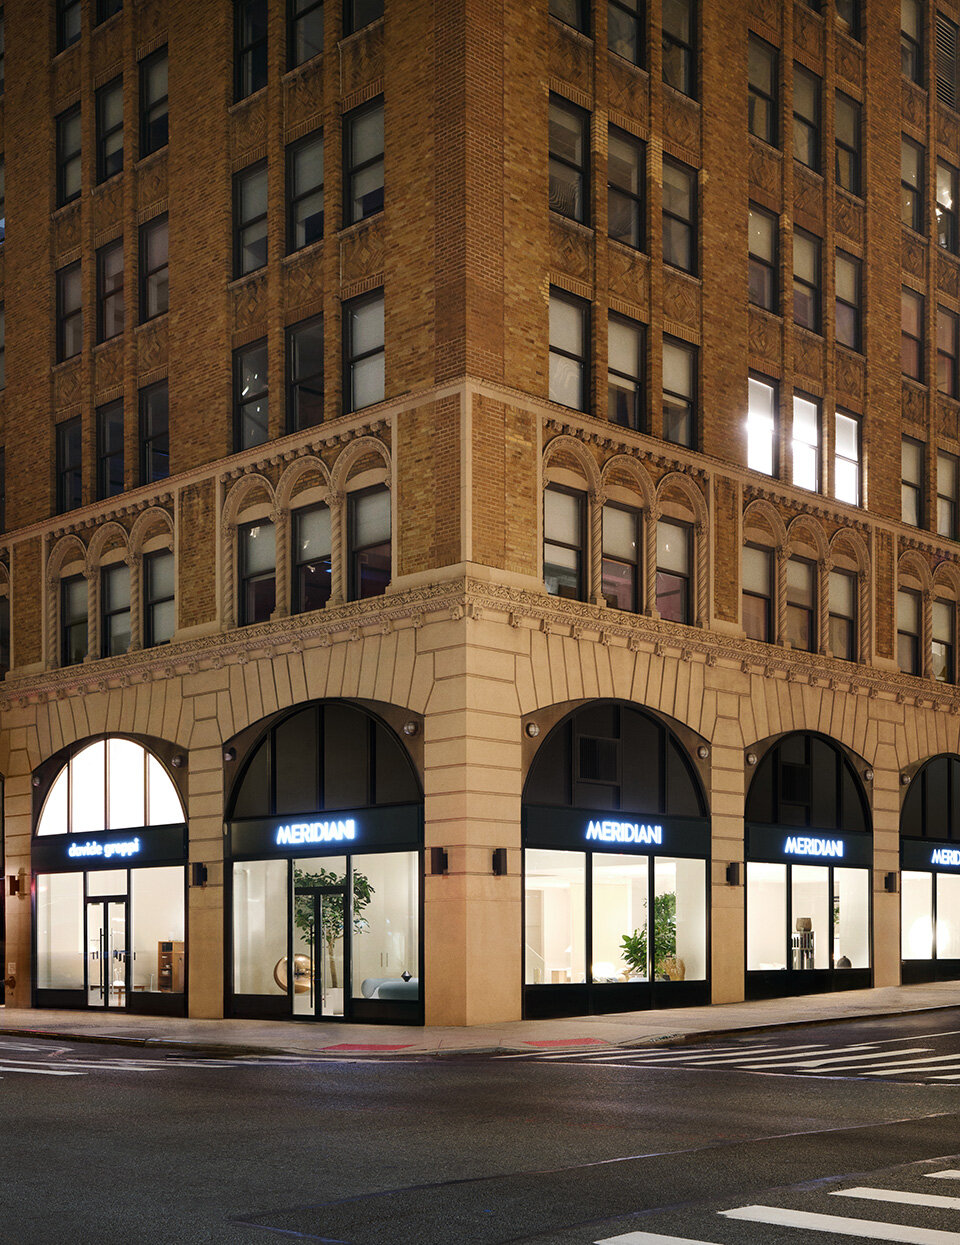 The new Meridiani flagship store made its debut in New York